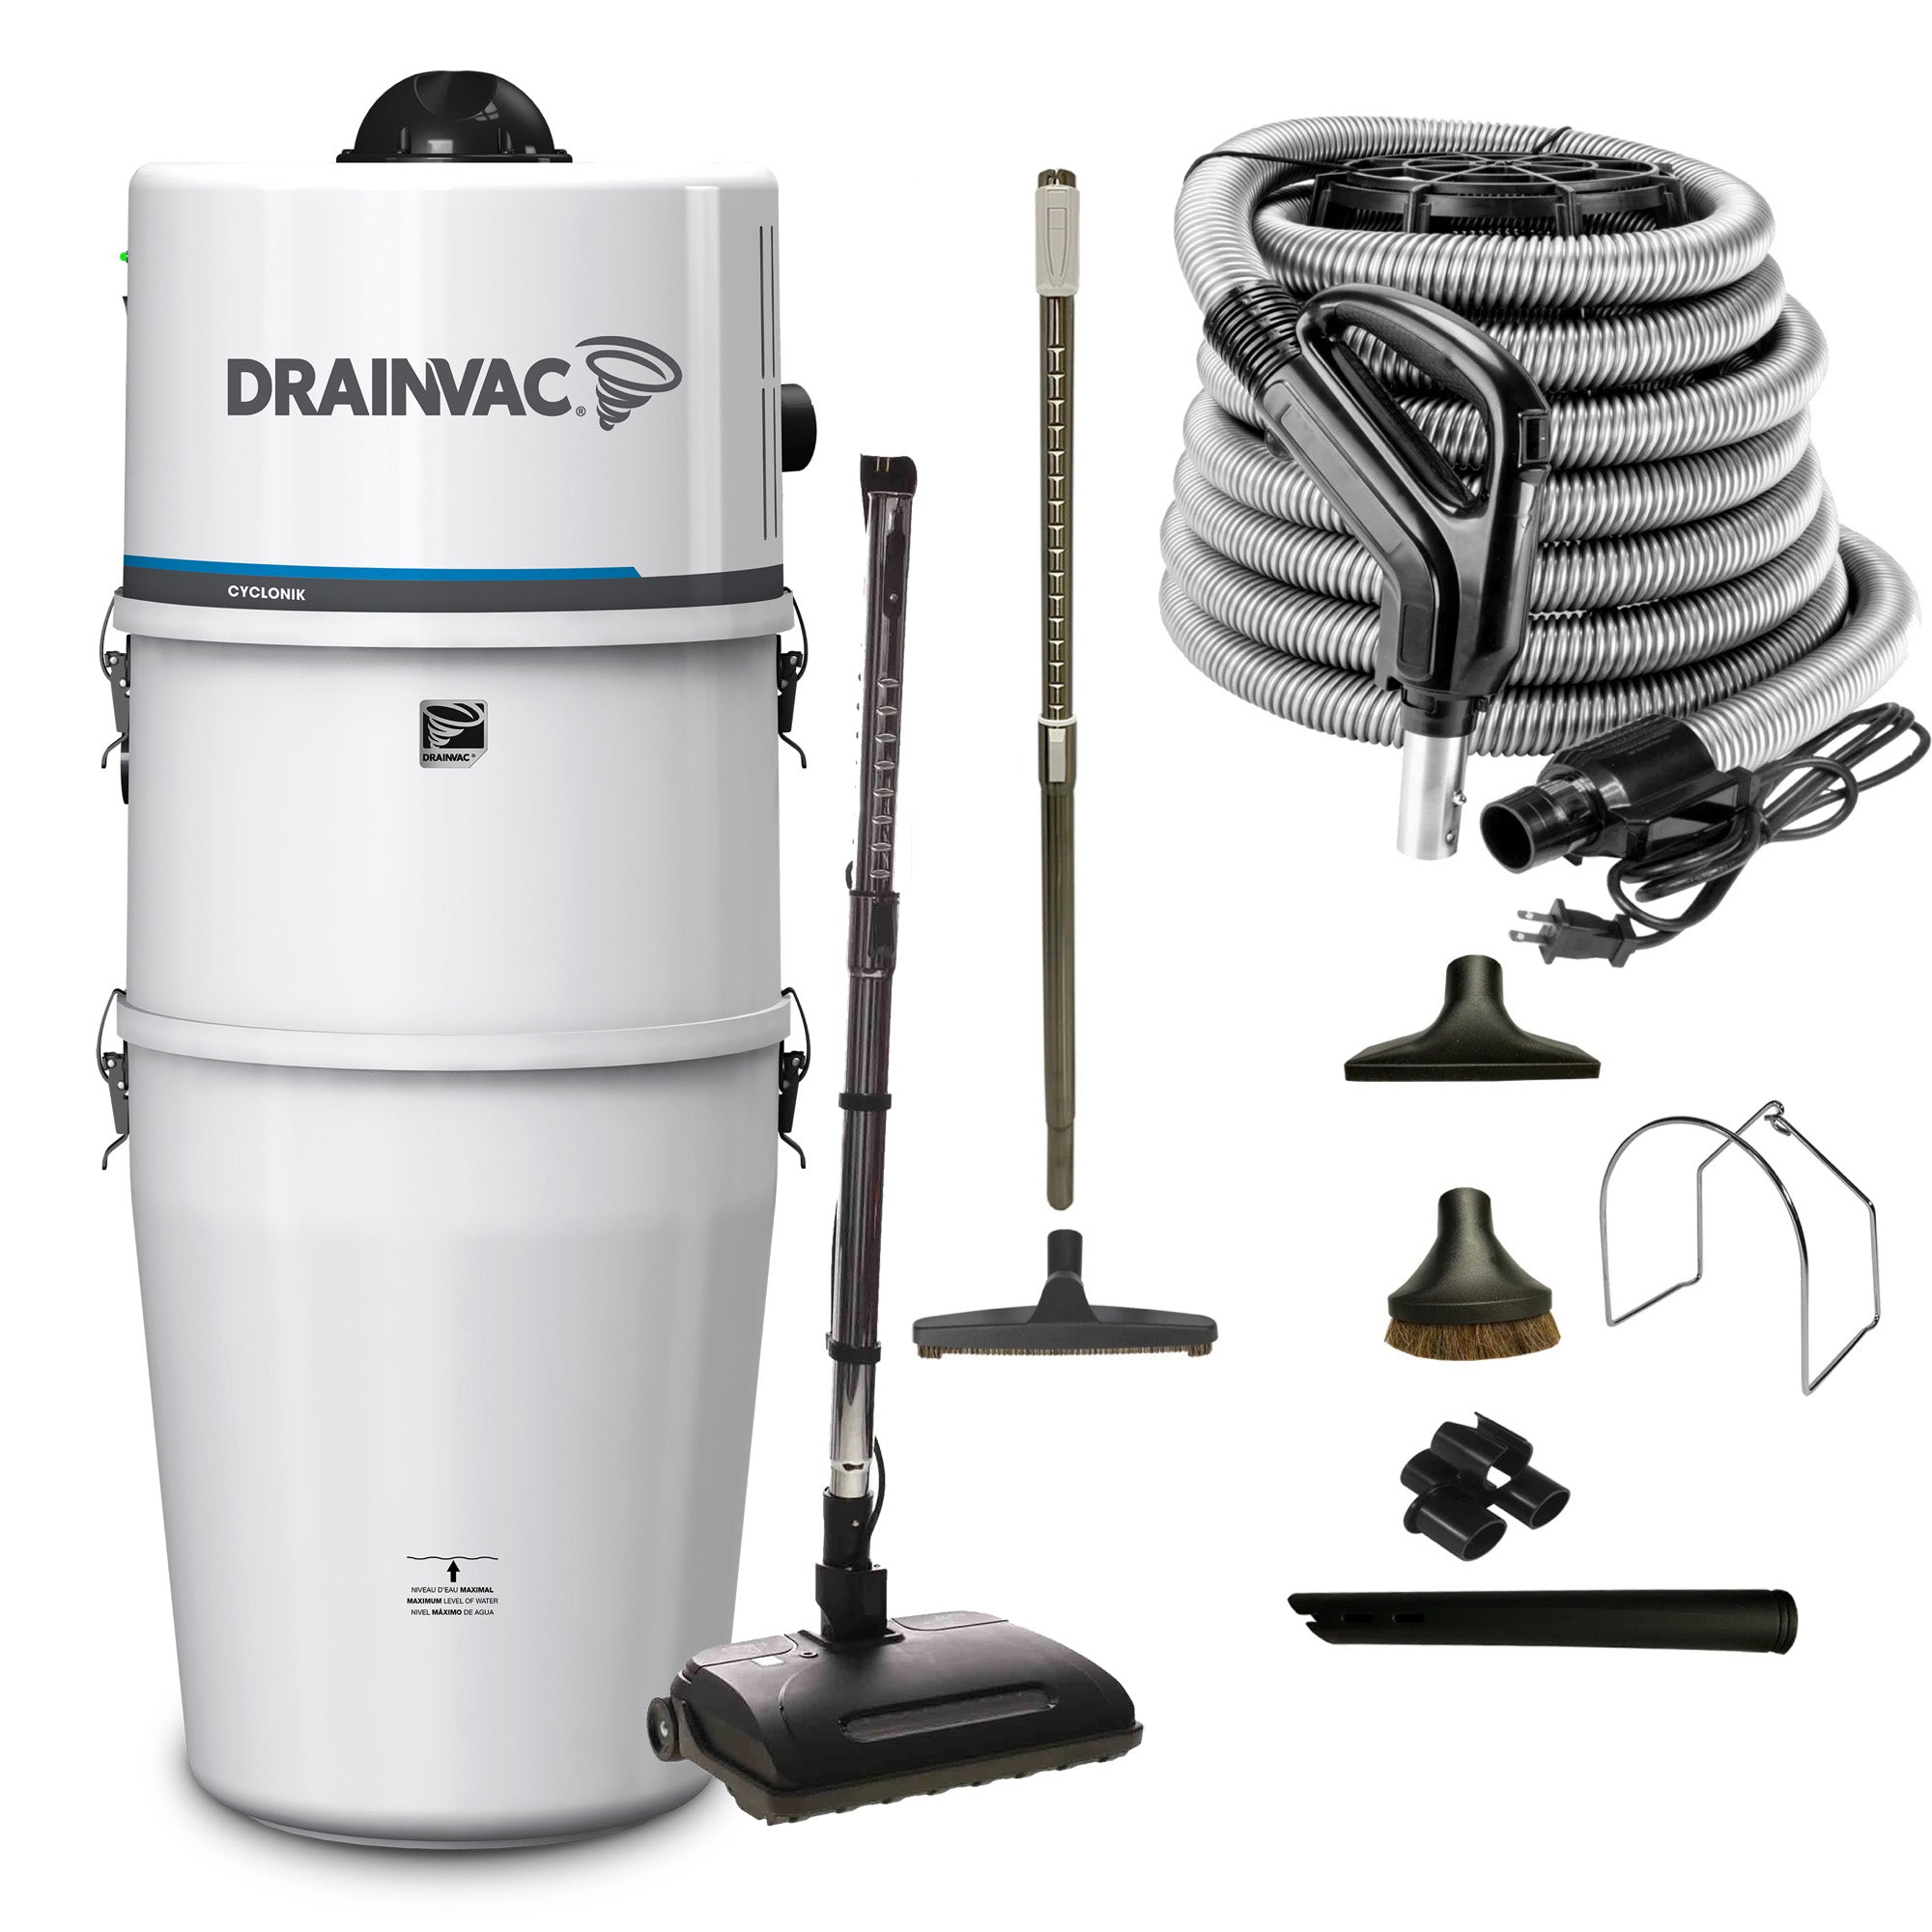 DrainVac Cyclonik Wet & Dry Central Vacuum | 700 Air Watts with Cartridge and Airstream Electric Package